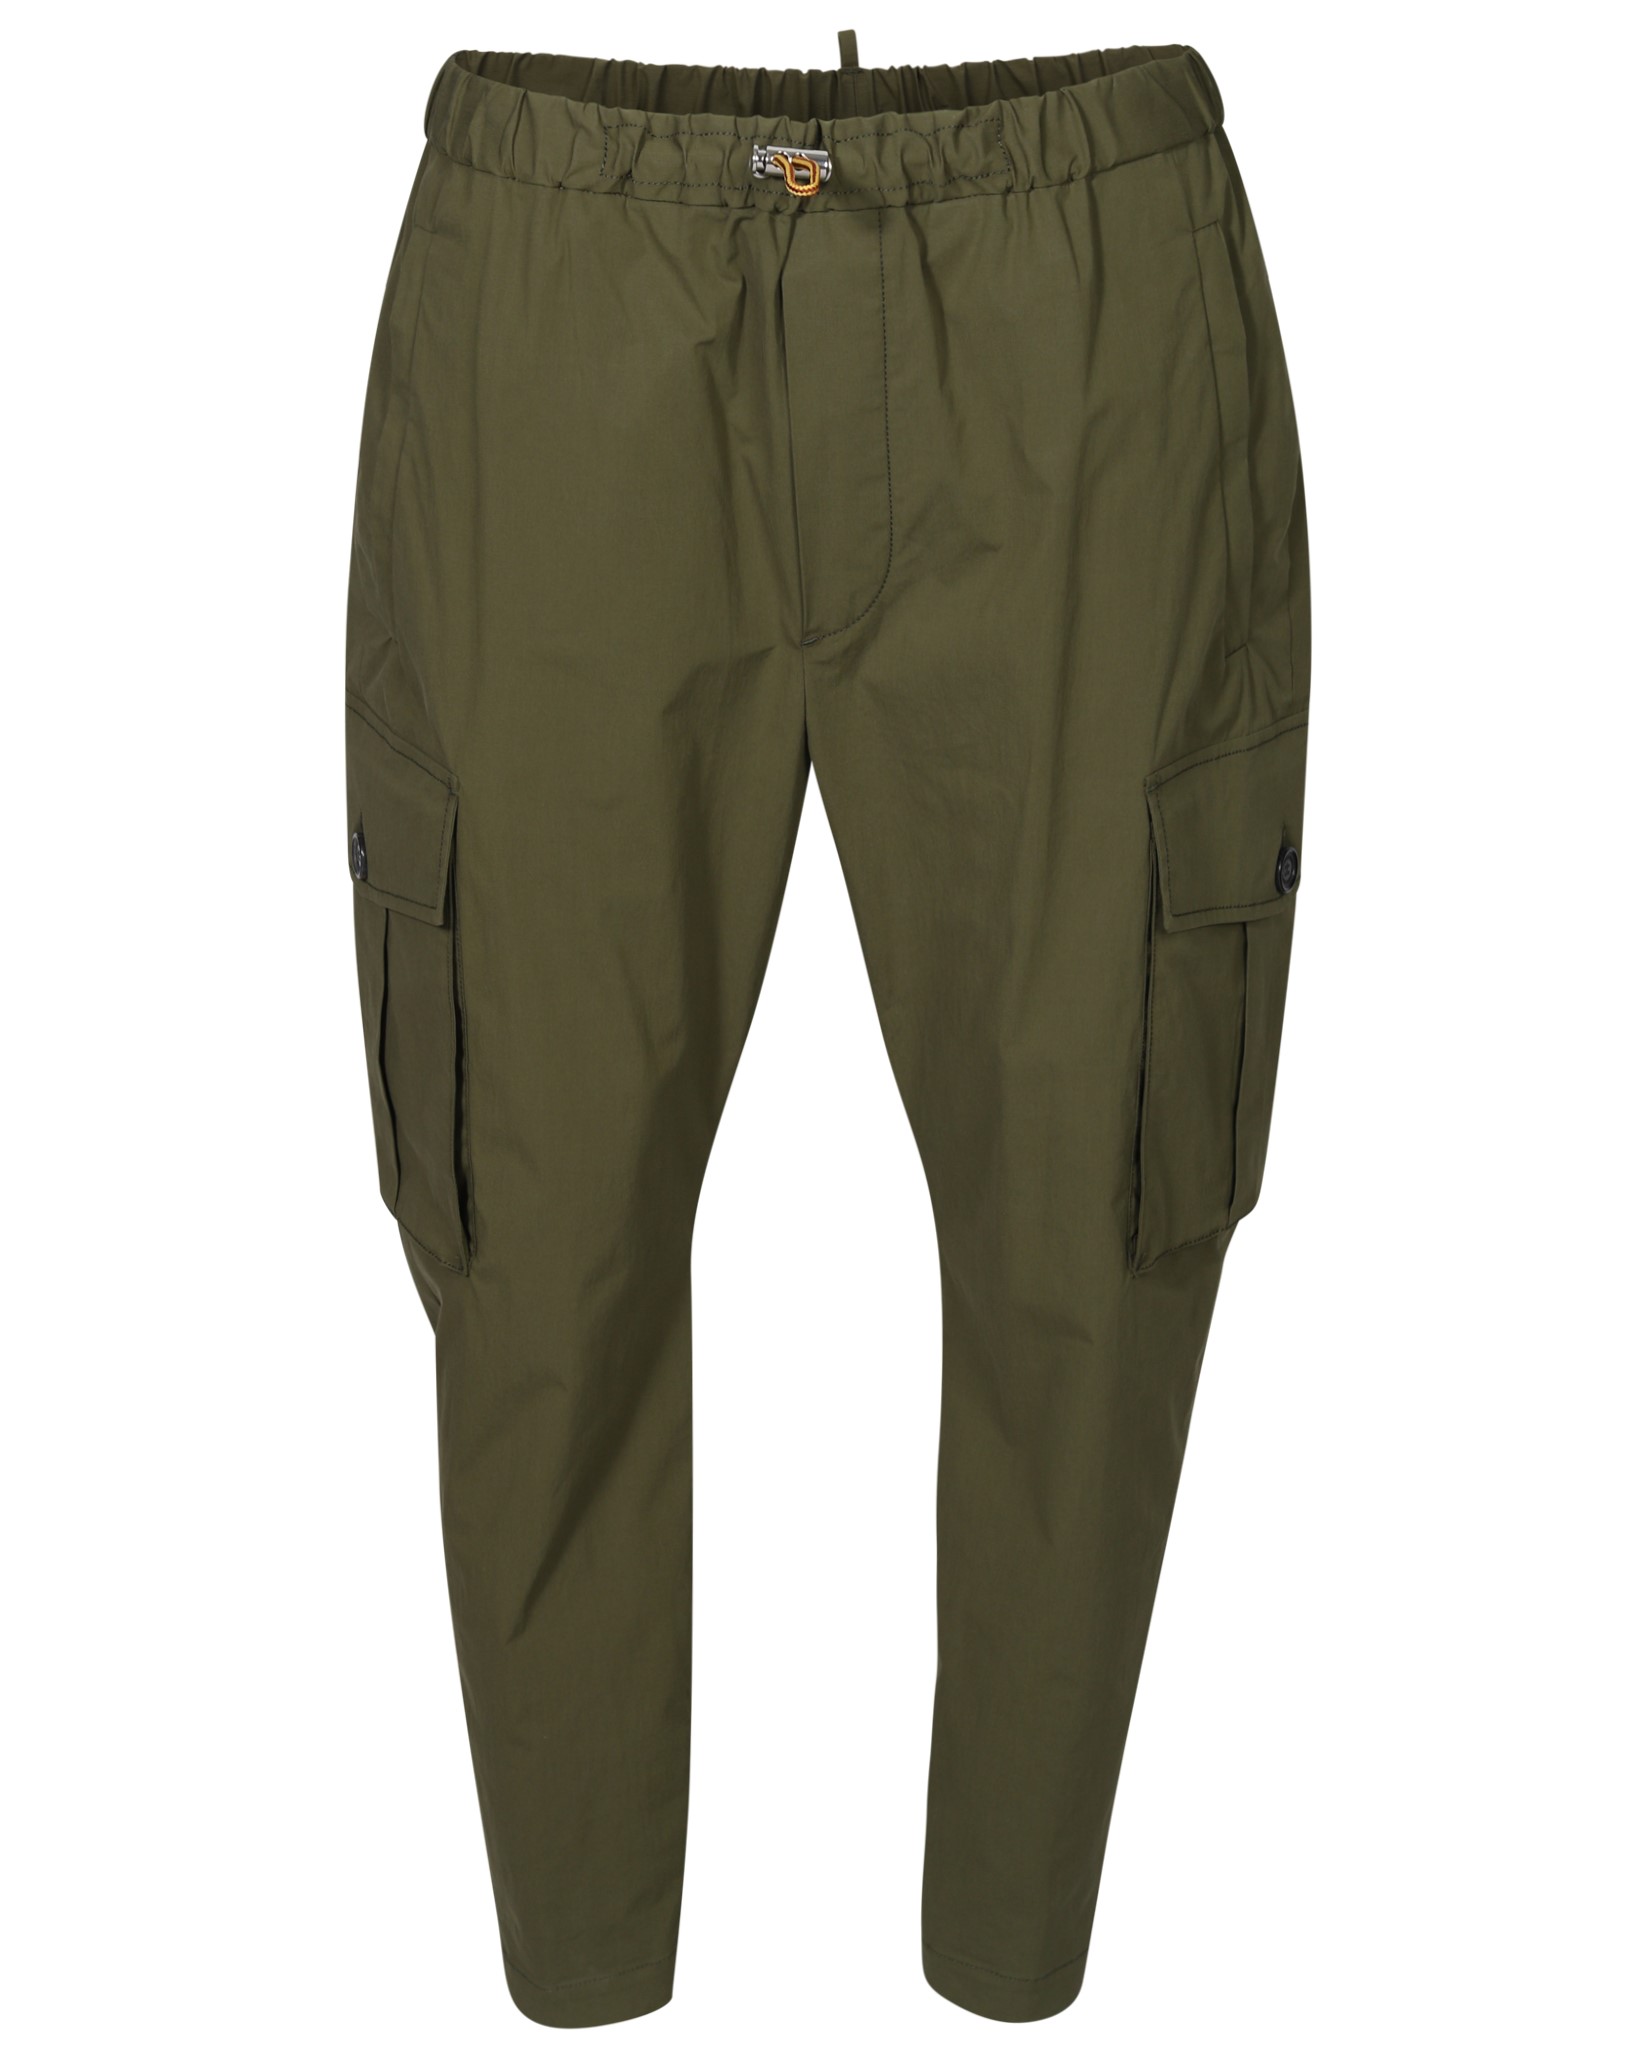 DSQUARED2 Pully Cargo Pant in Olive 46